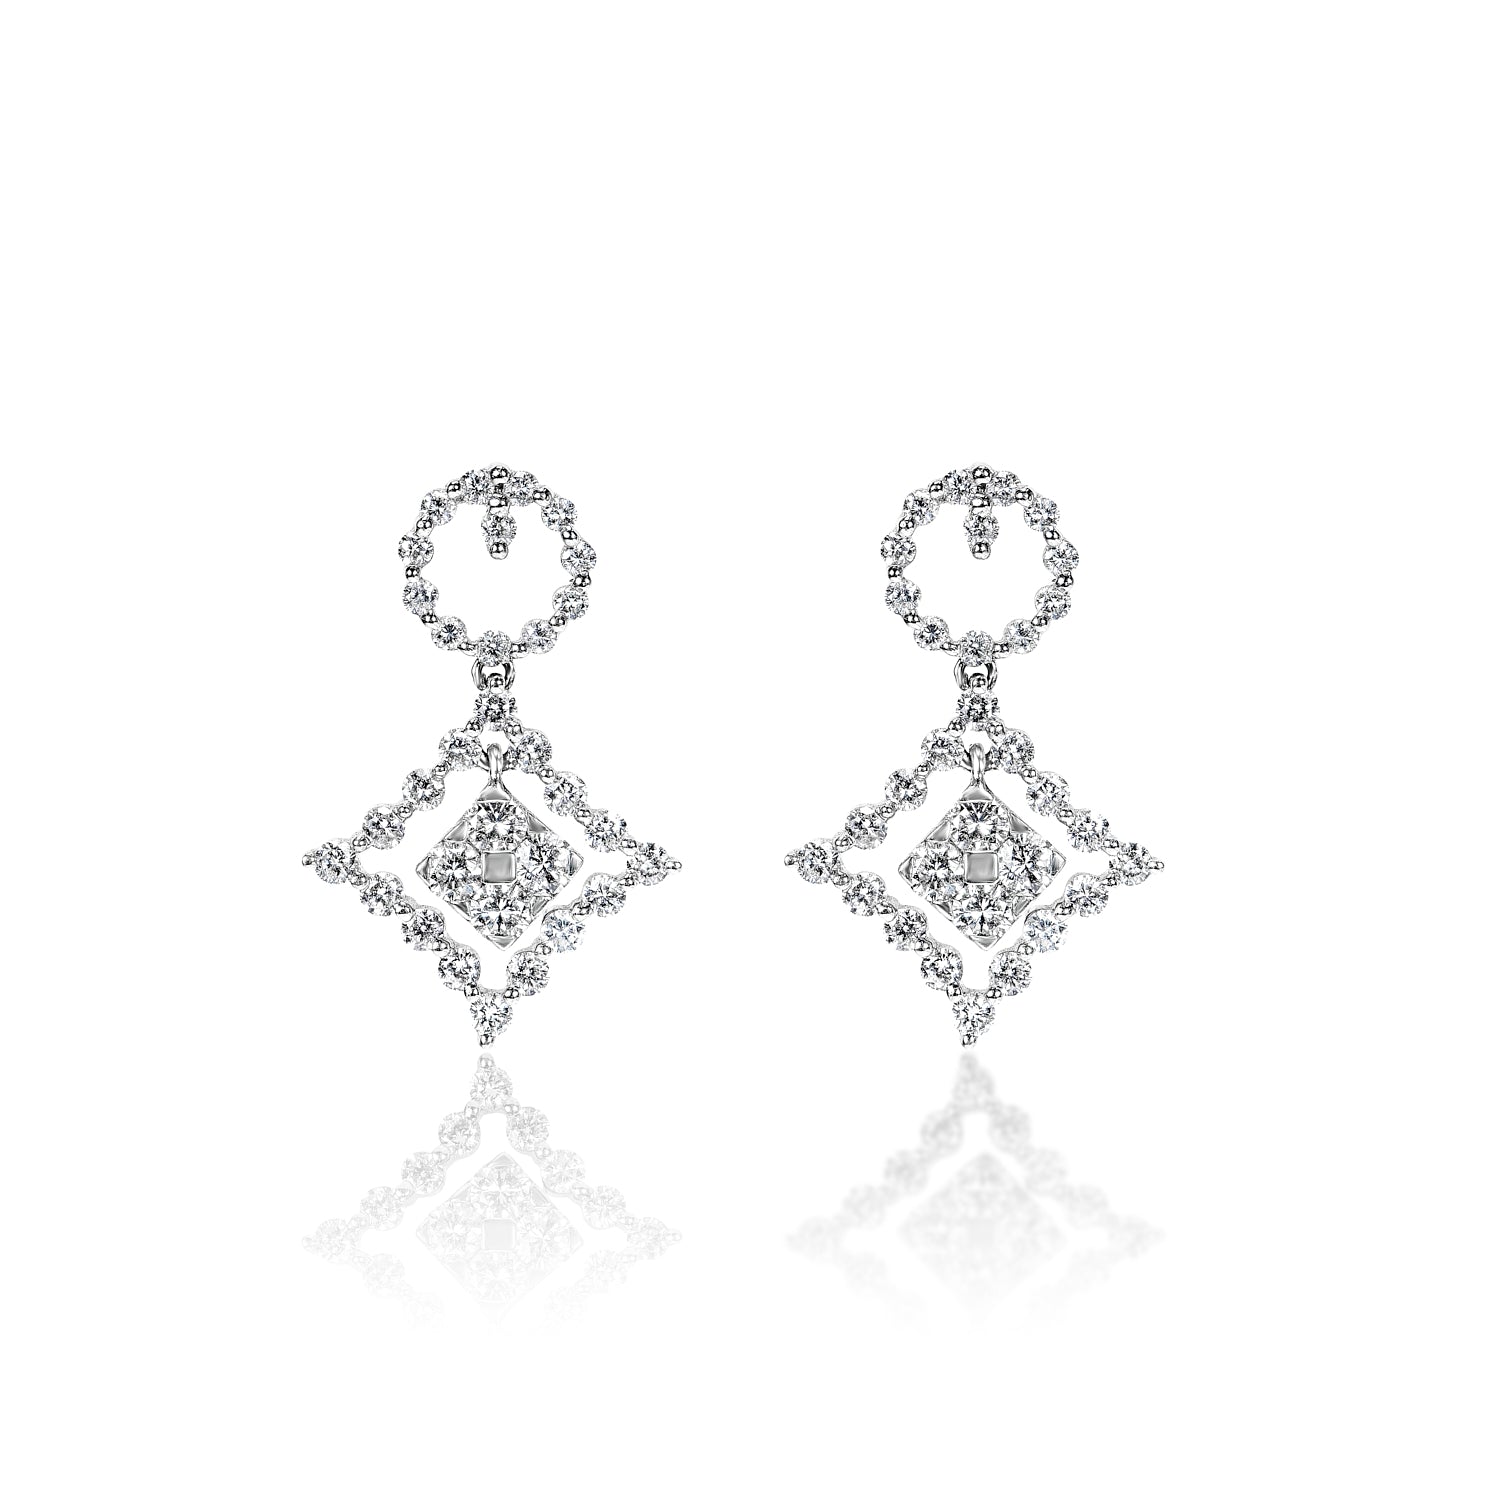 Emely 2 Carats Round Brilliant Cut Diamond Dangle Earrings in 18k White Gold Front View